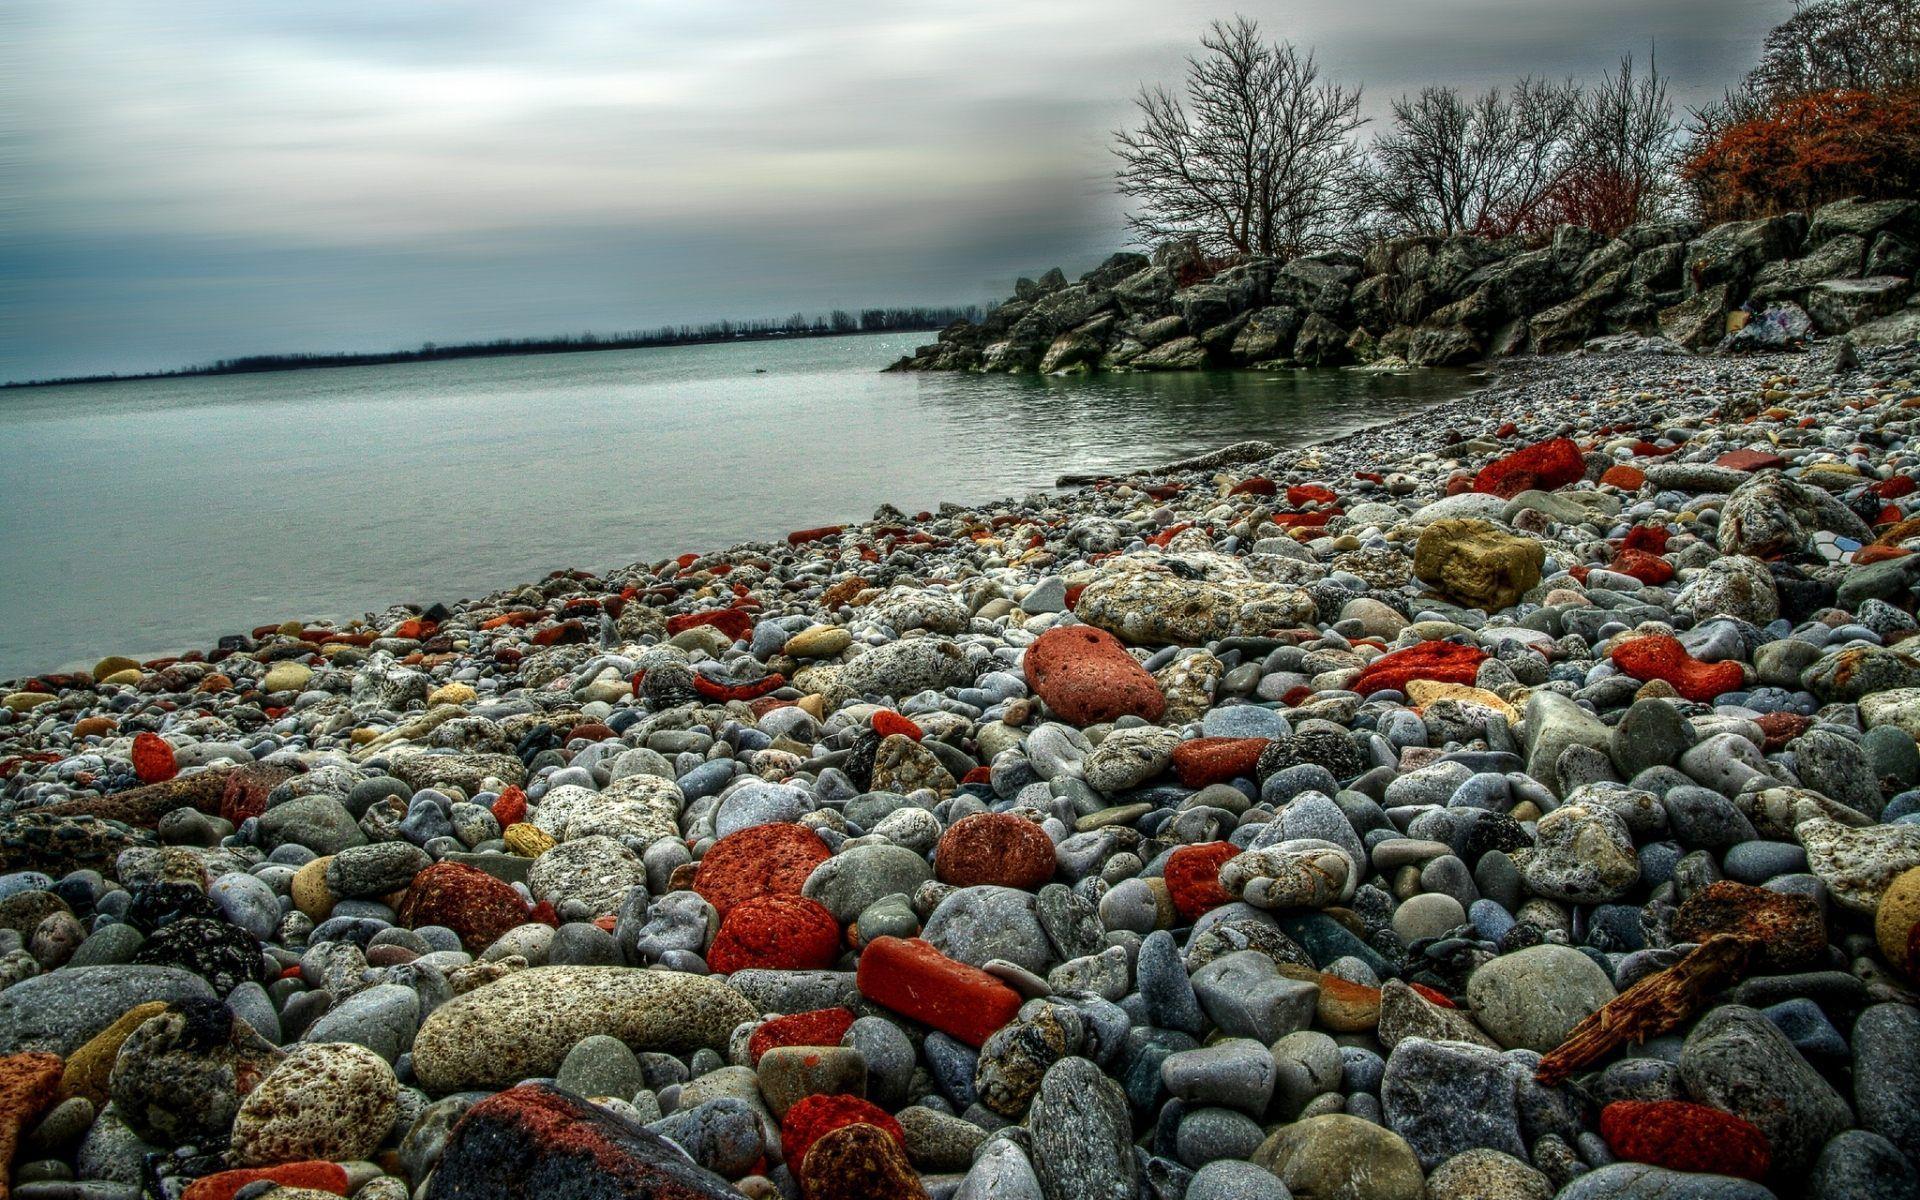 Pebbles Stone Texture Wallpaper For Desktop in High Resolution